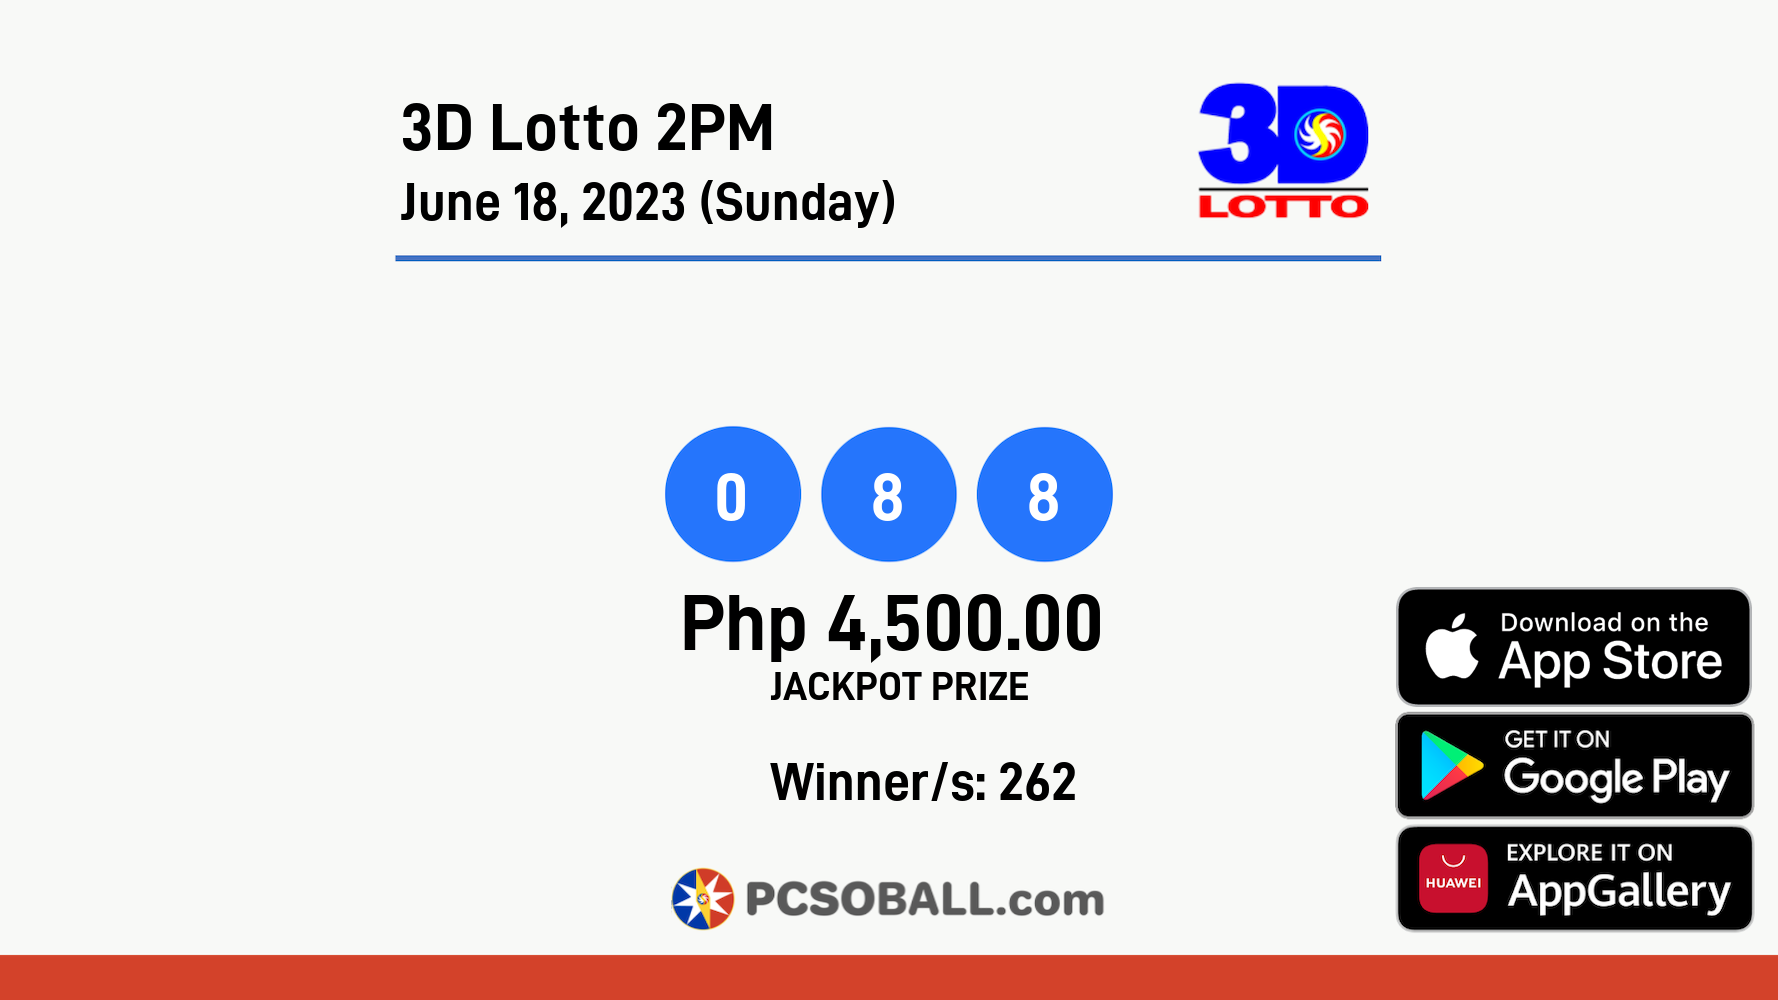 3D Lotto 2PM June 18, 2023 (Sunday) Result